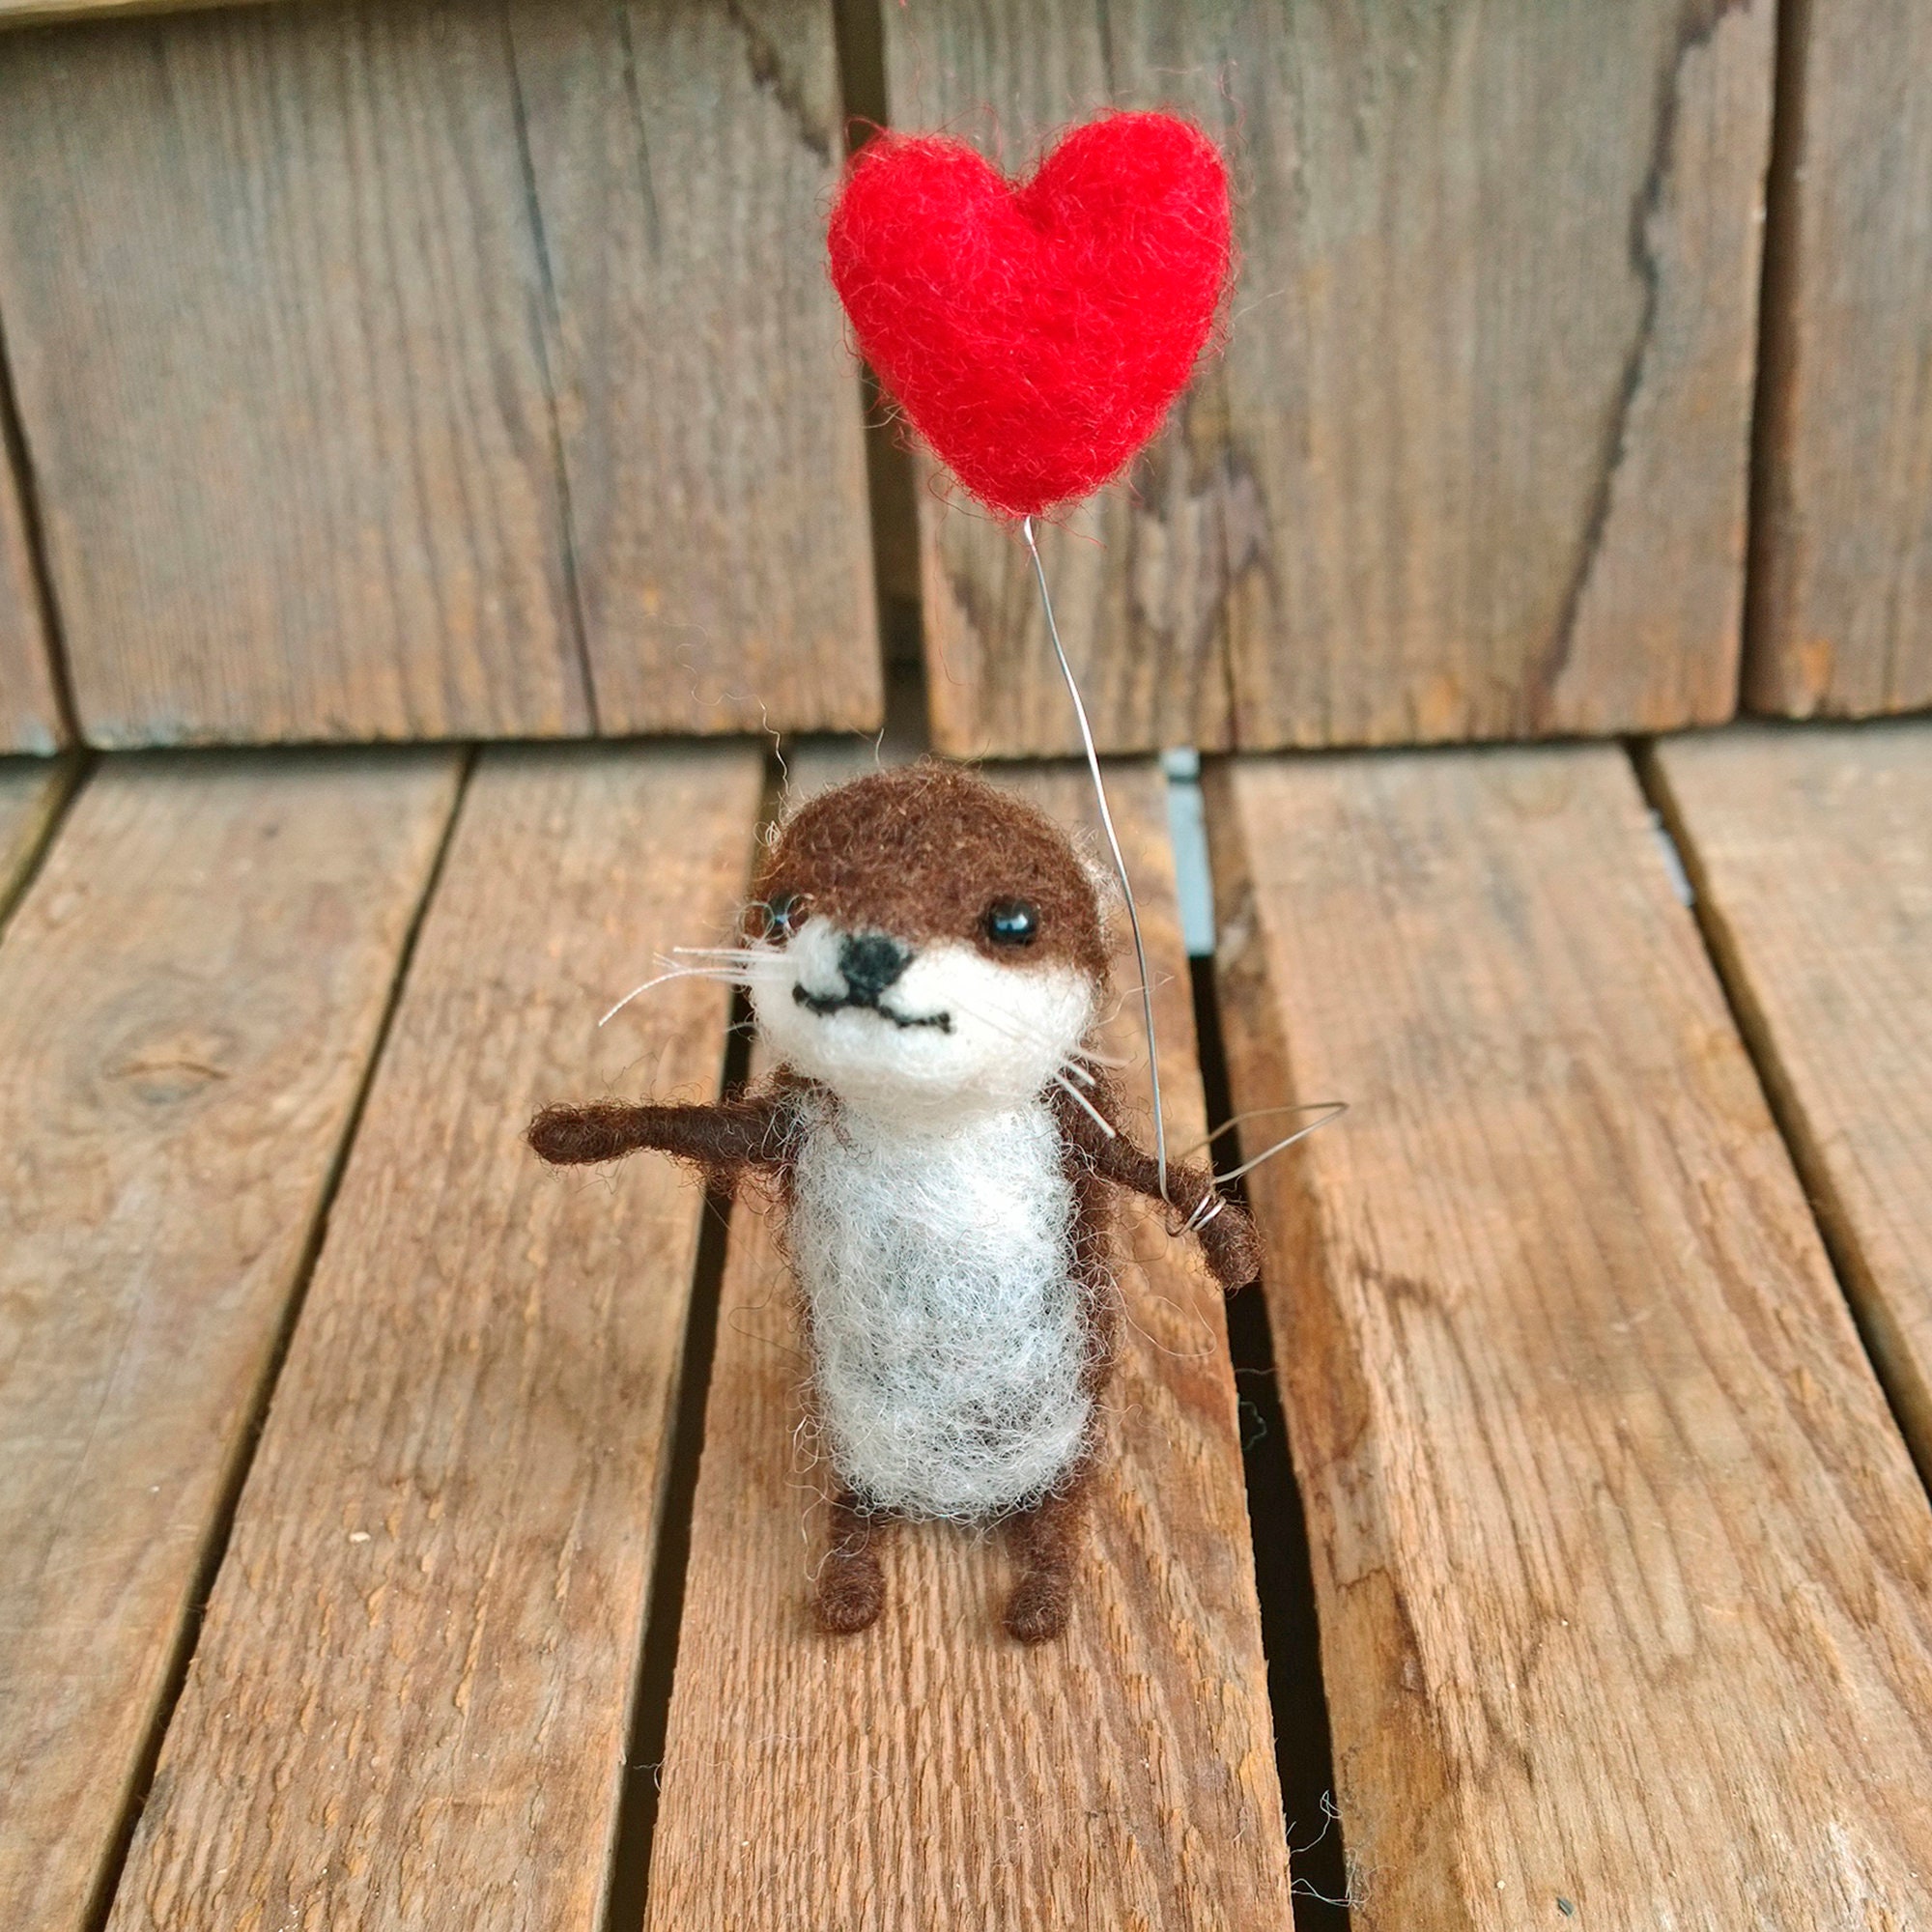 Otter Holding a Heart Polymer Clay Cutters